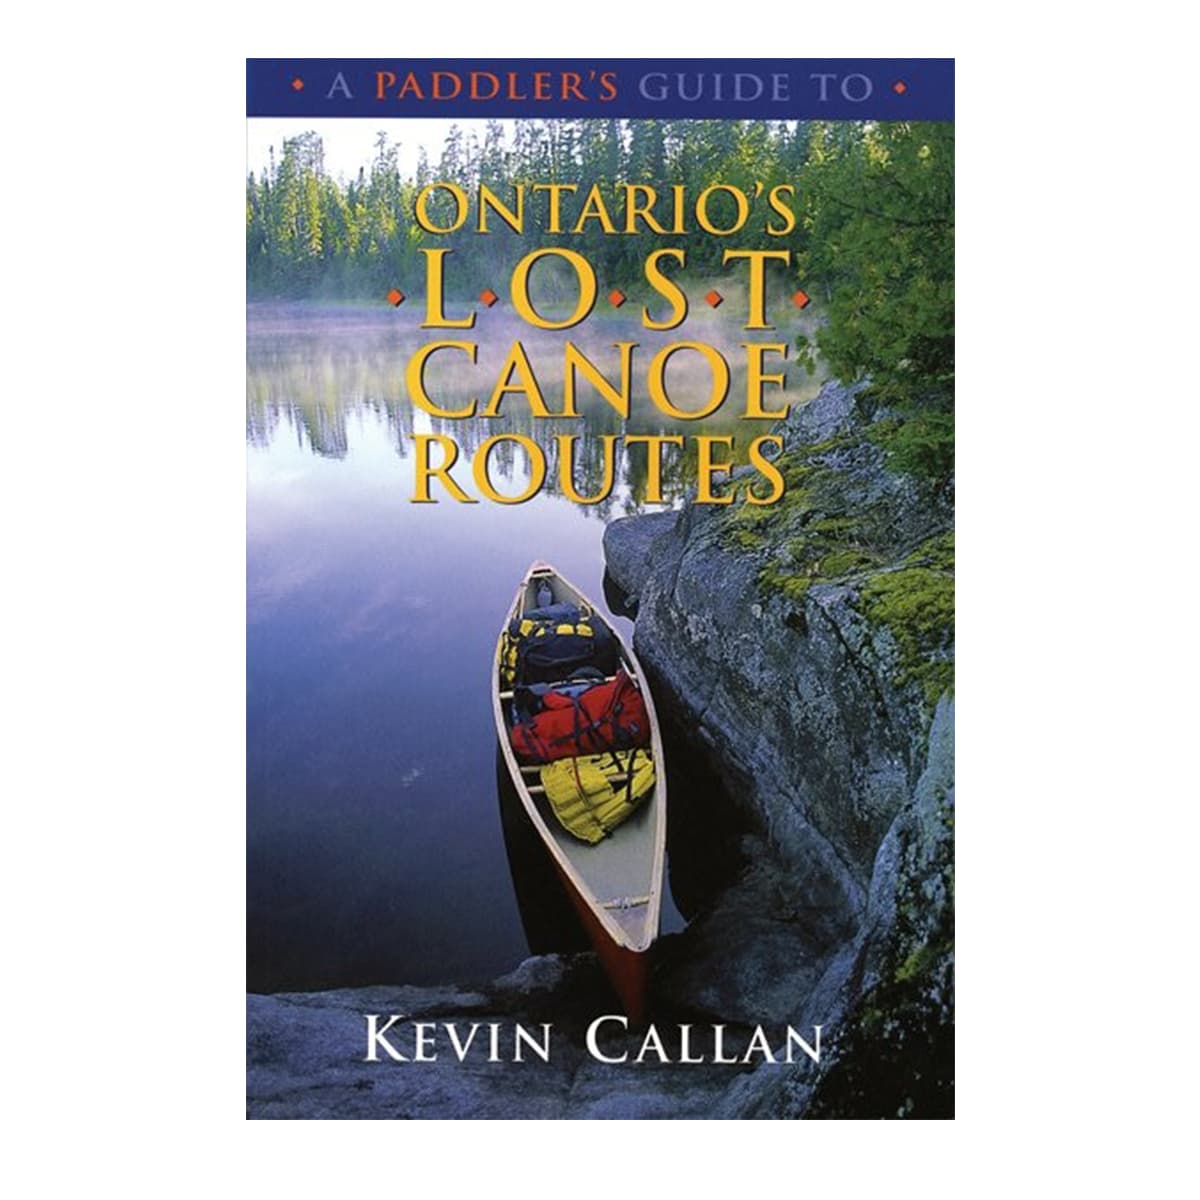 A Paddler's Guide to Ontario's Lost Canoe Routes